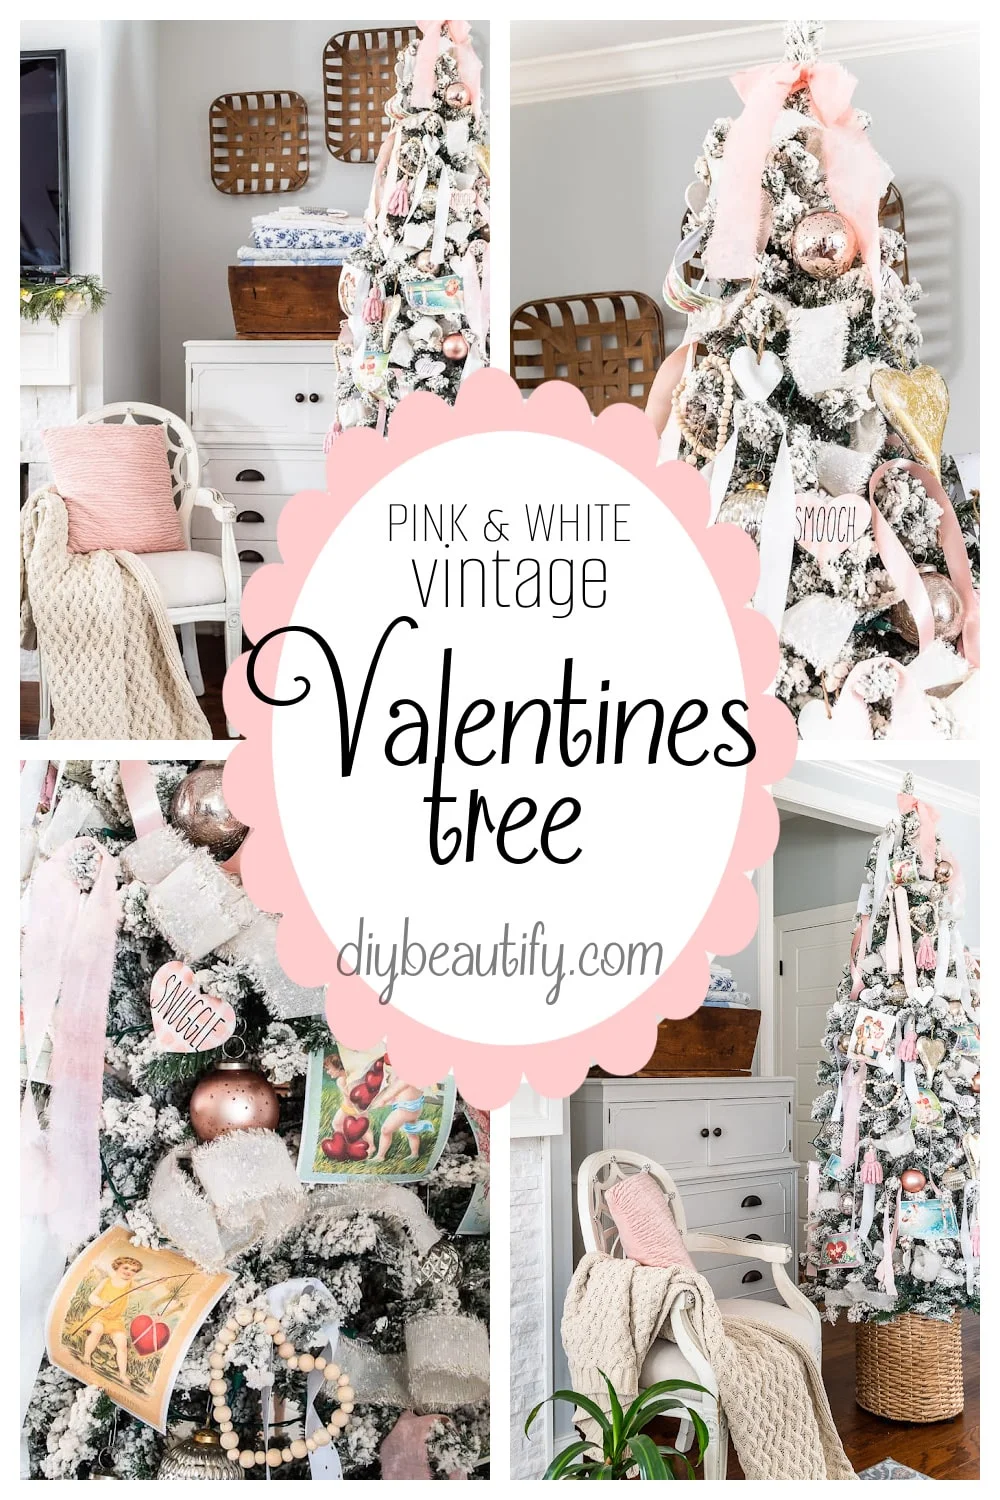 pink and white vintage Valentines tree, pillows, white painted furniture